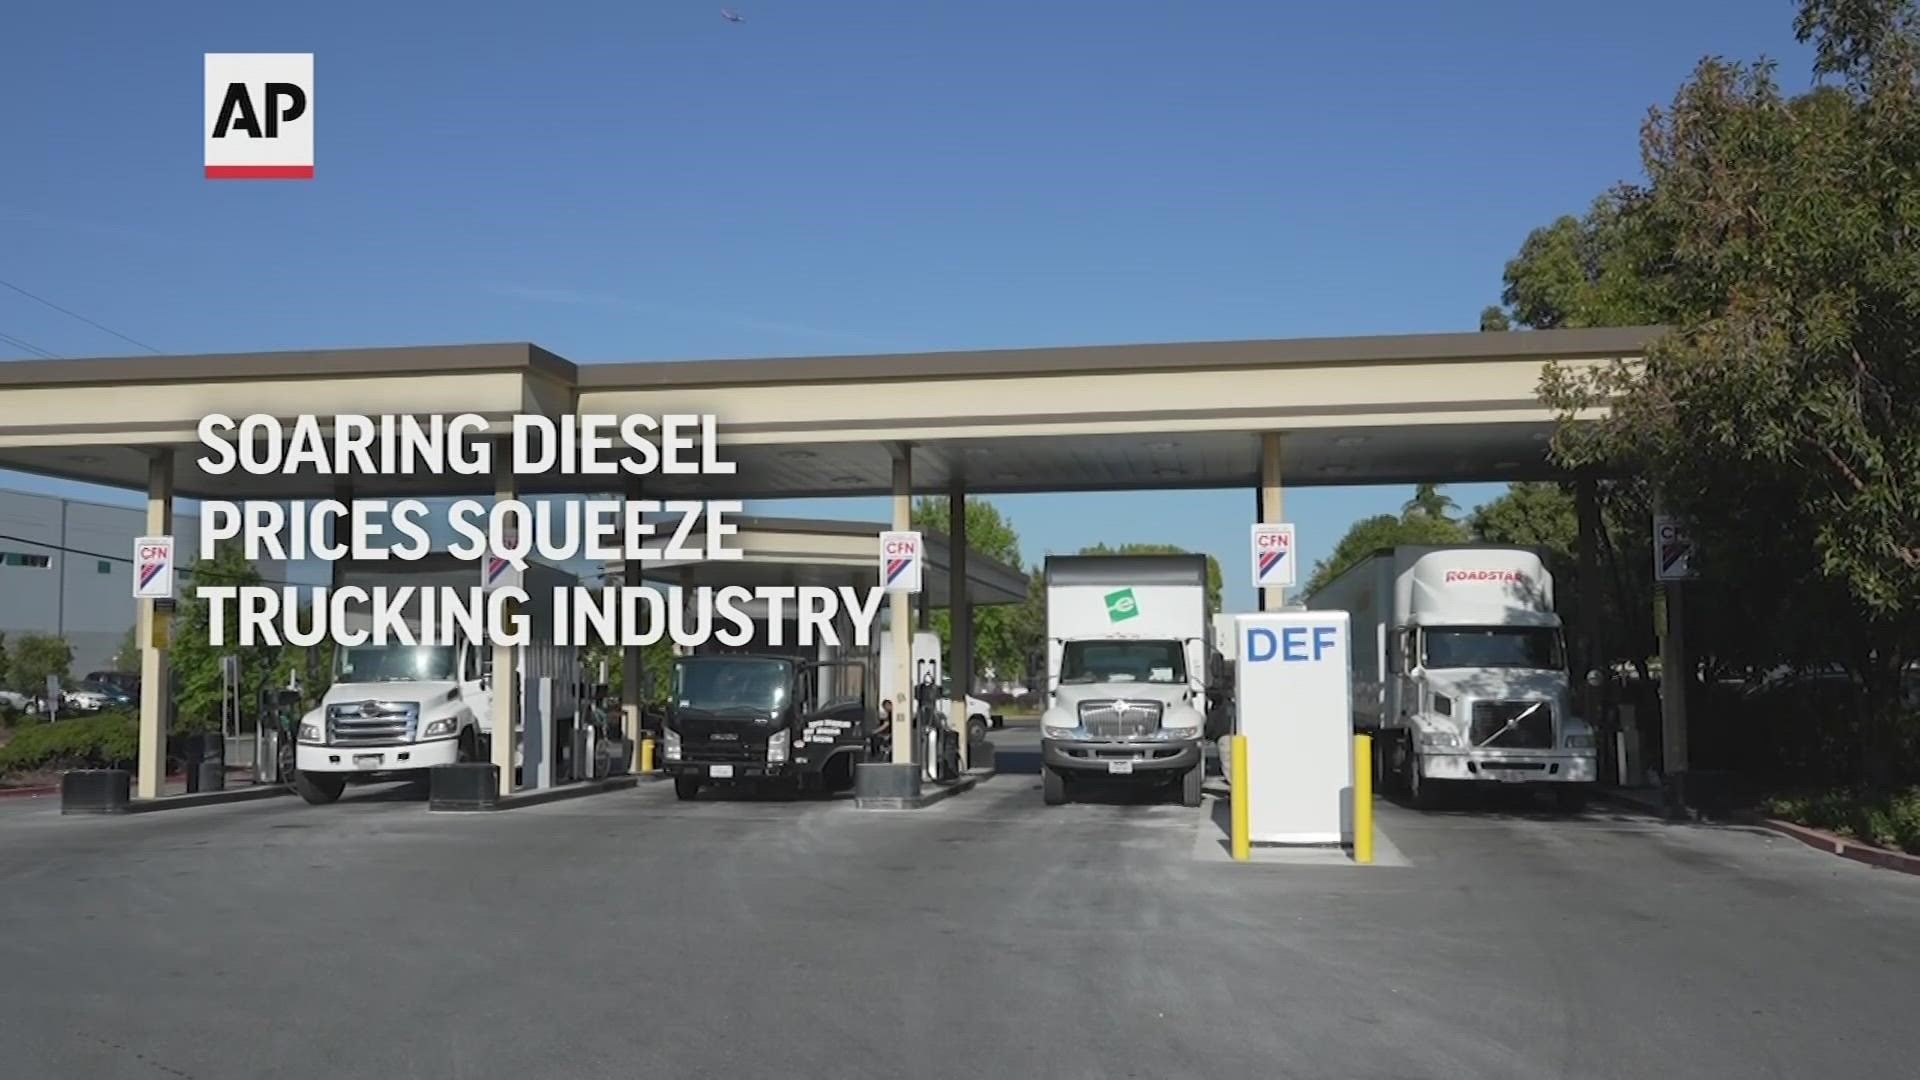 Gas prices aren't the only thing going up. Diesel prices are high and hurting the trucking industry.